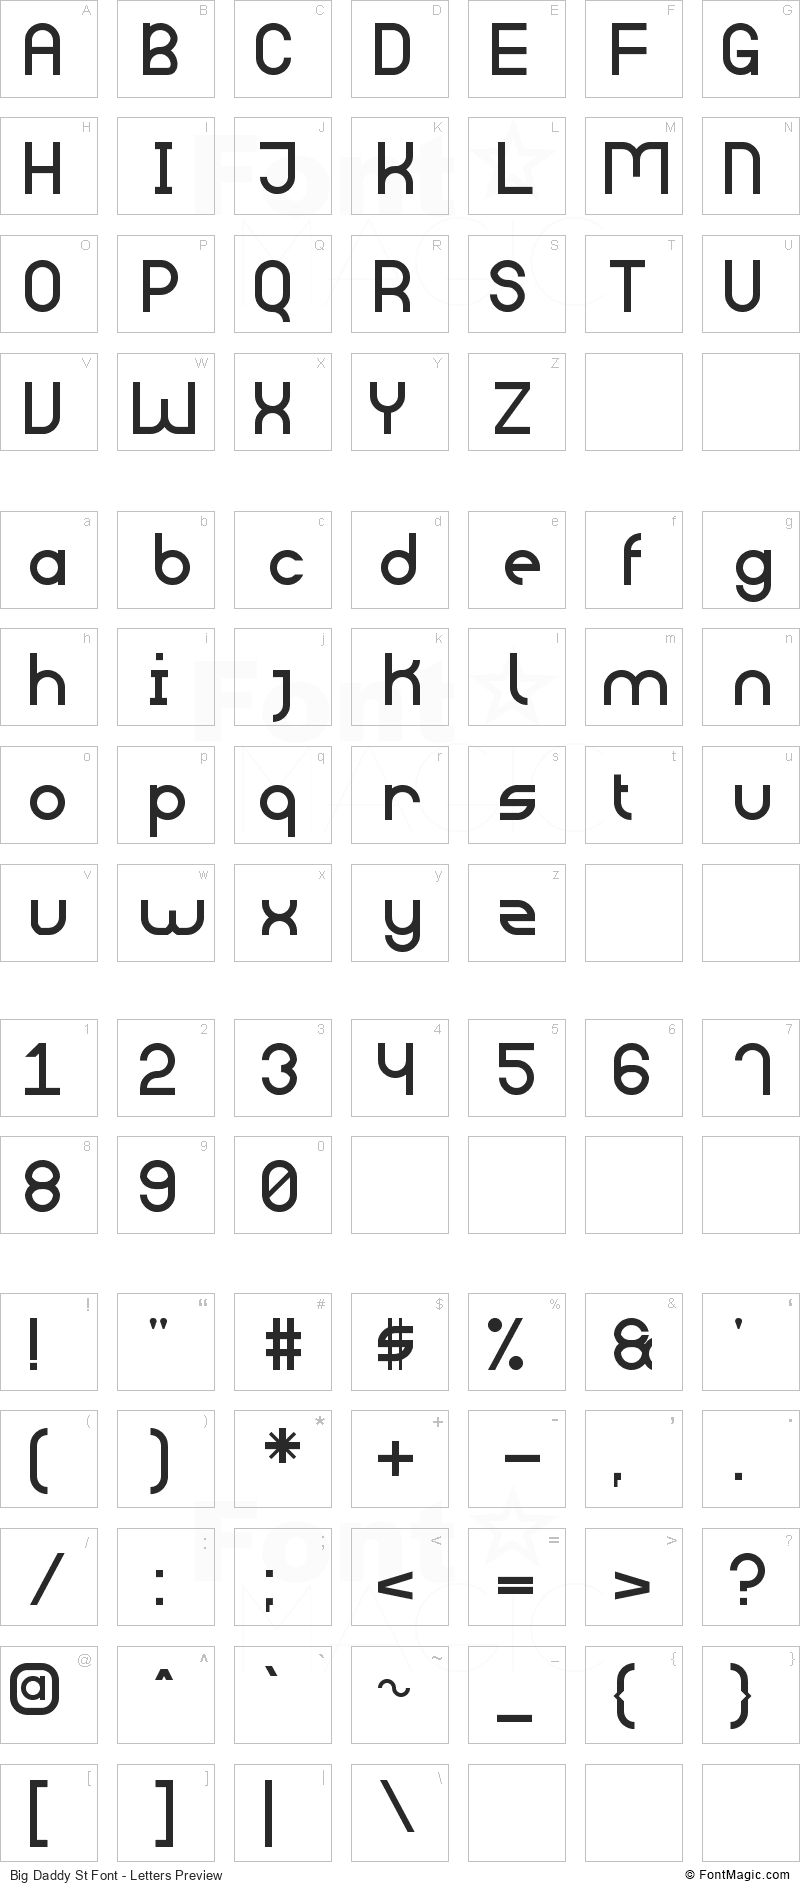 Big Daddy St Font - All Latters Preview Chart